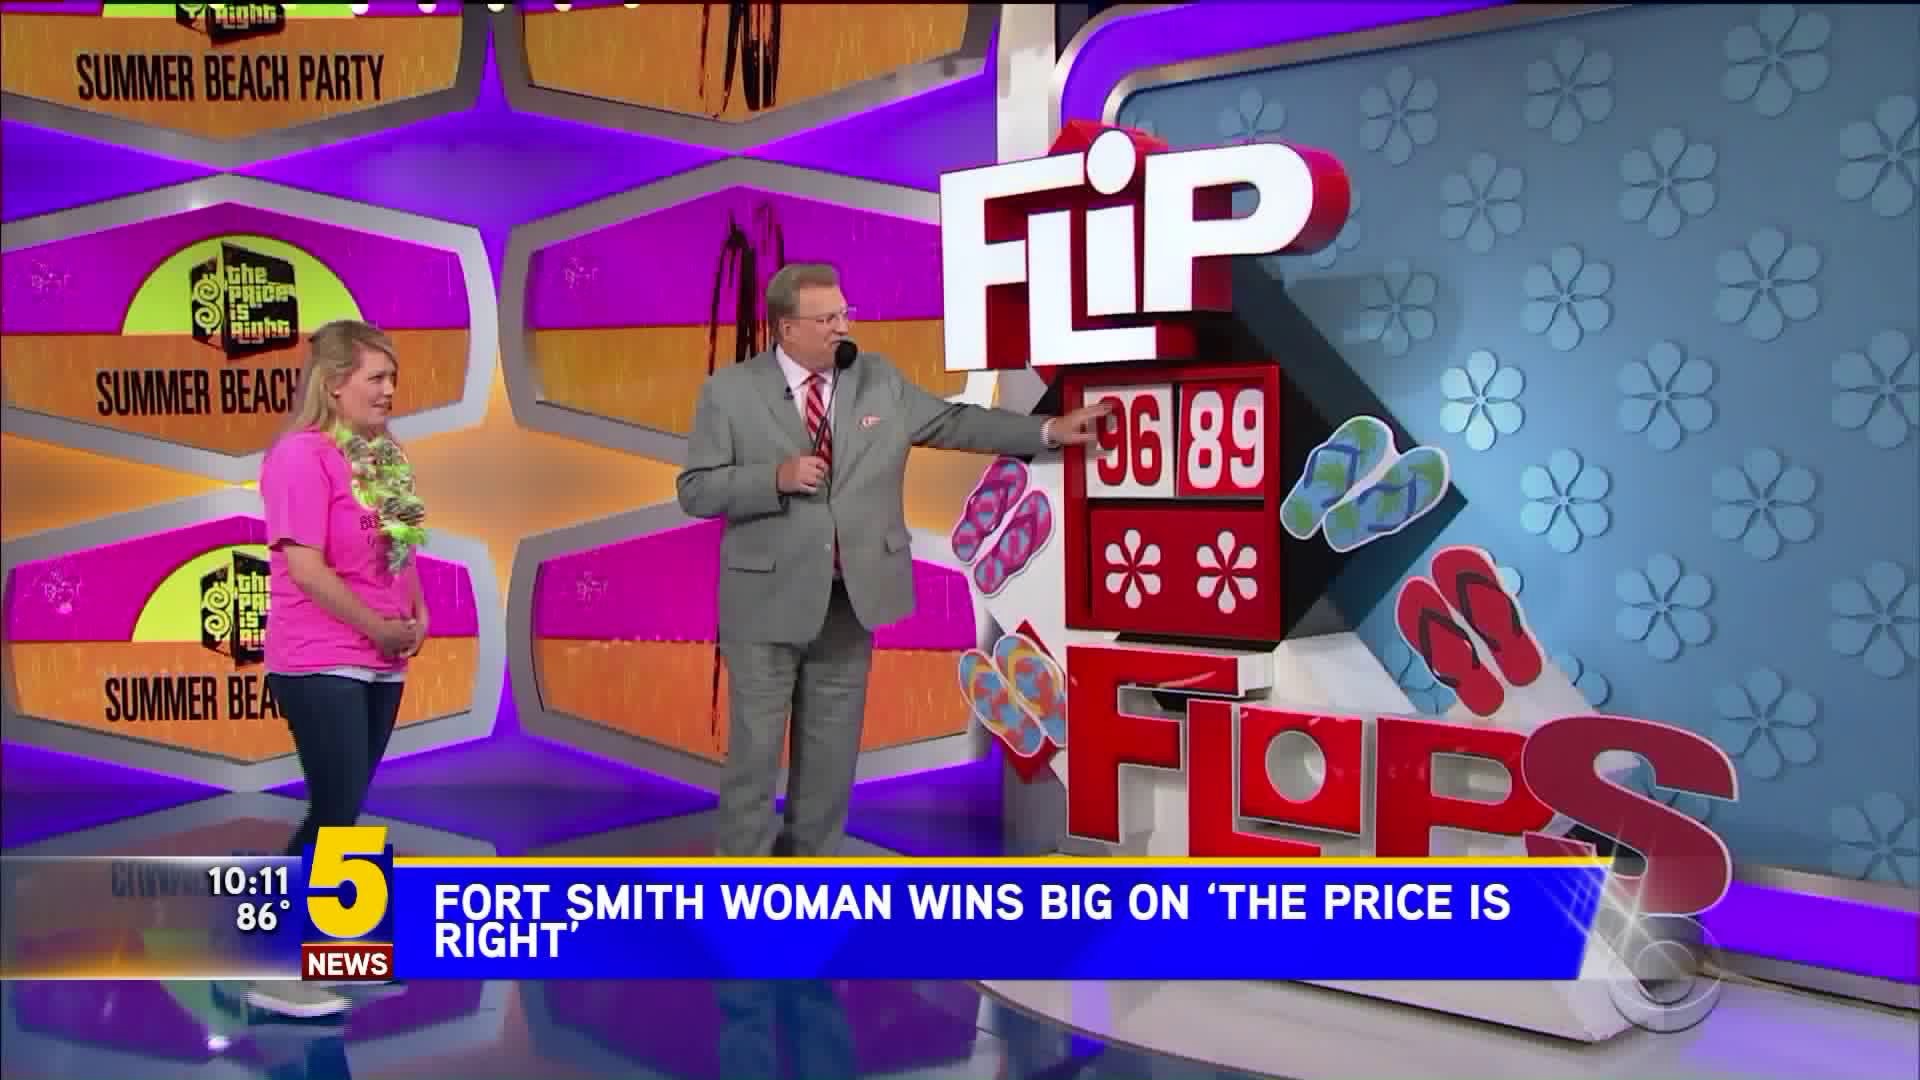 Fort Smith Woman Wins Big on Price is Right